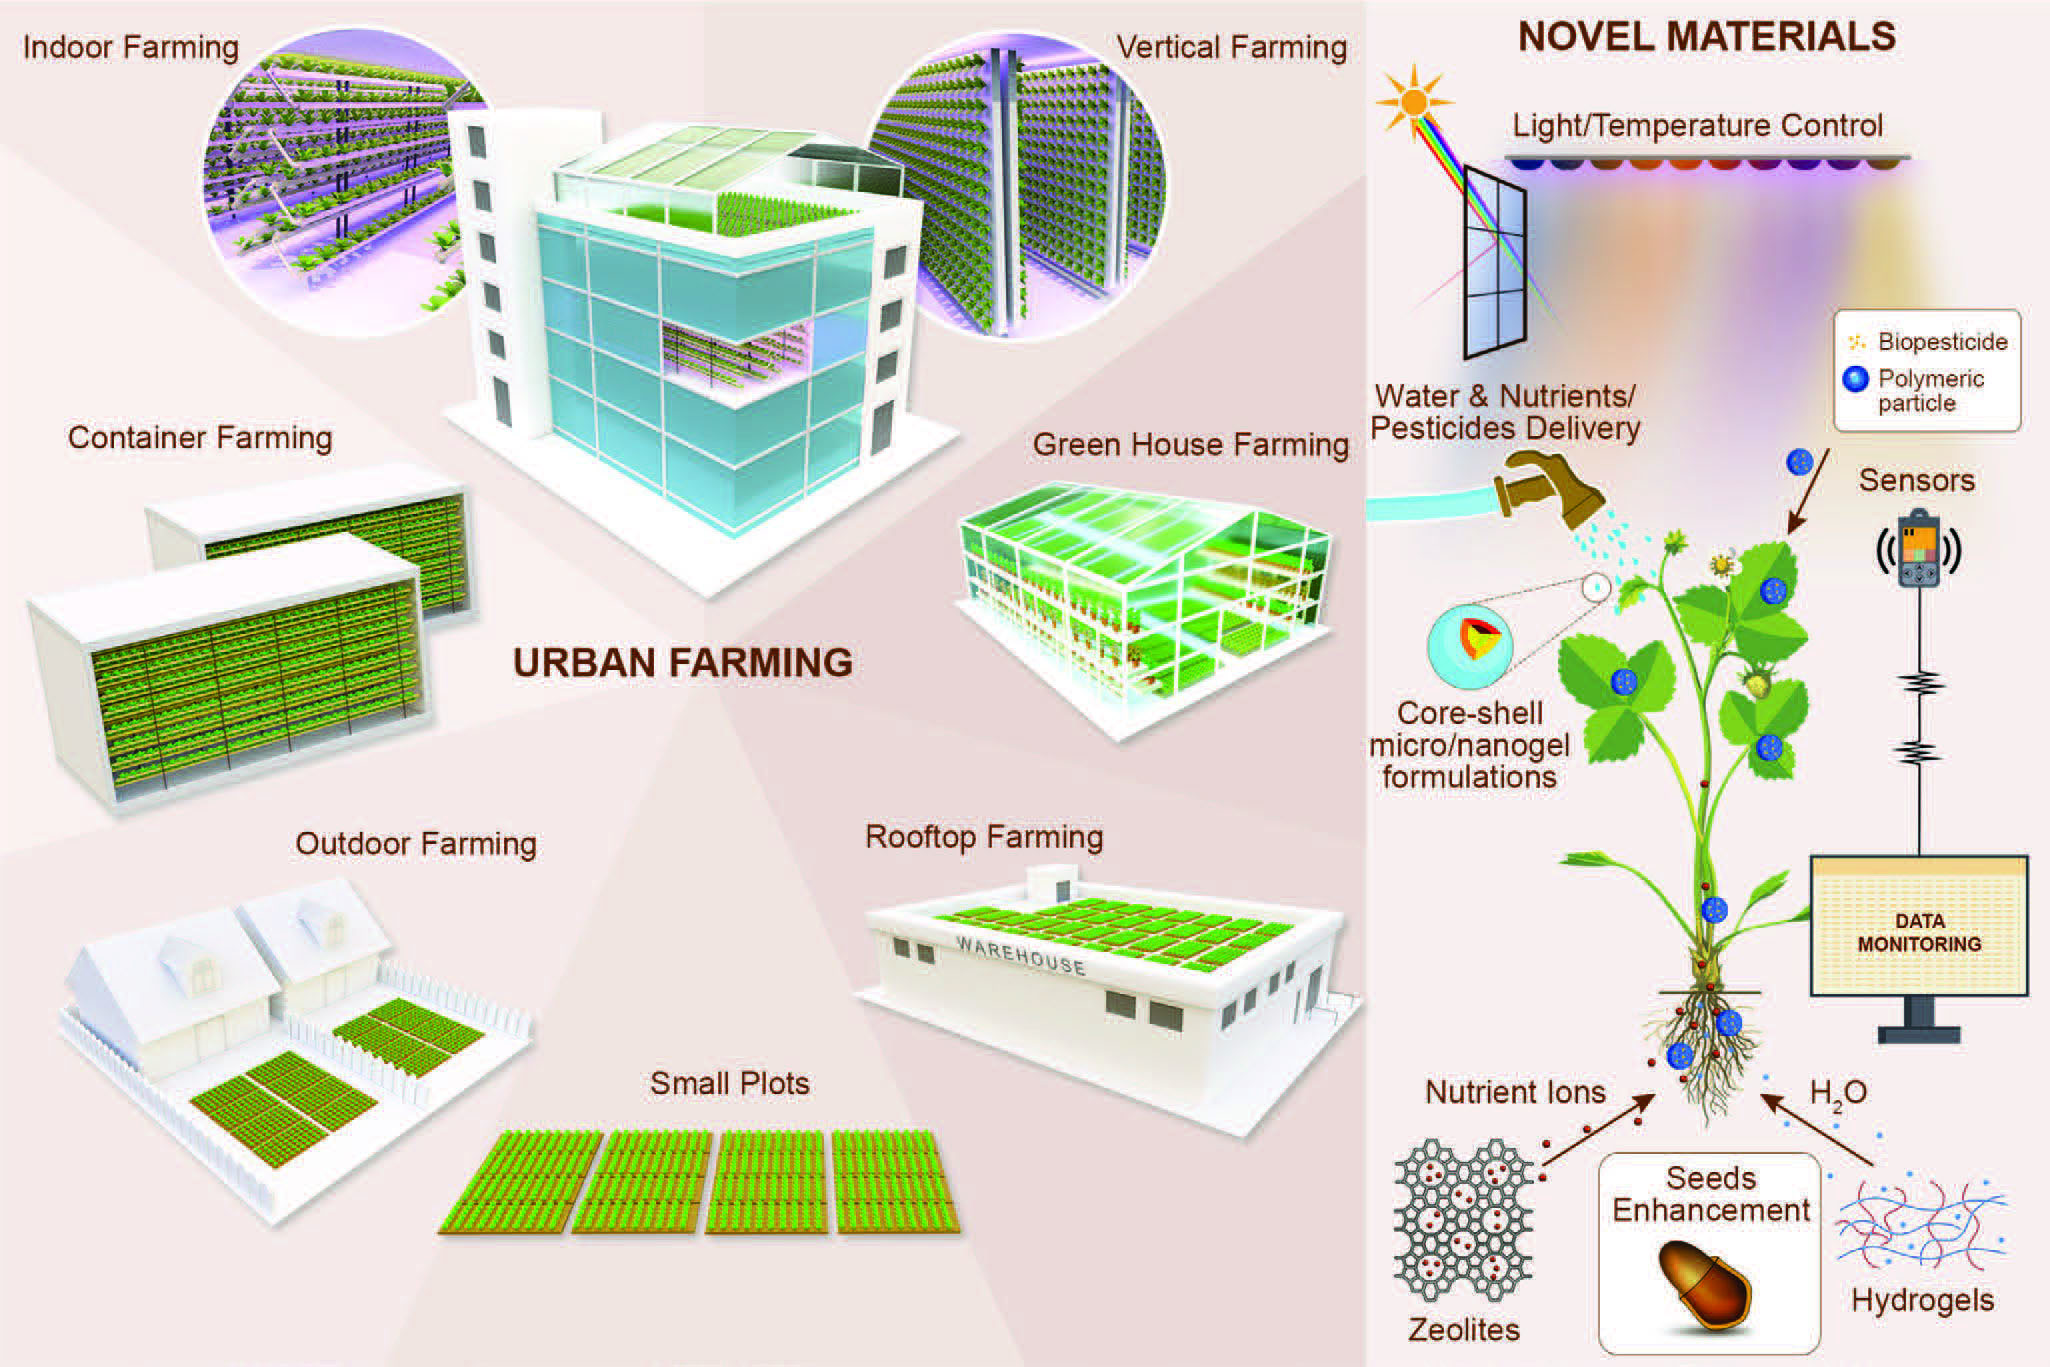 Different types of urban farming and the use of novel materials in the various aspects of plant growth